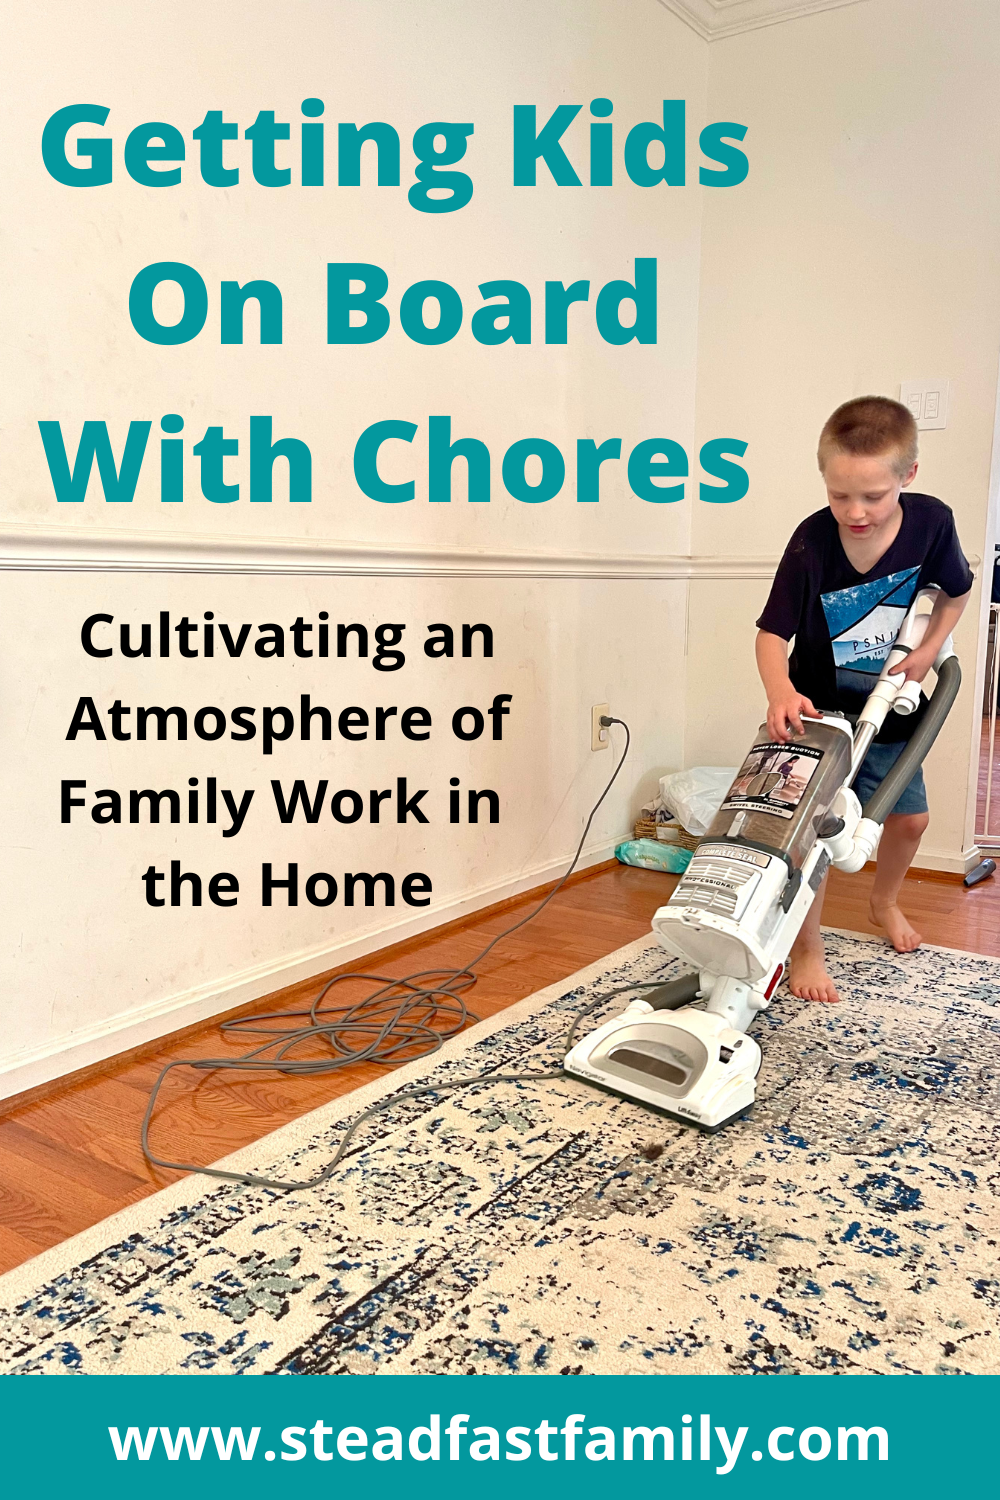 Getting Kids On Board With Chores: Cultivating an Atmosphere of